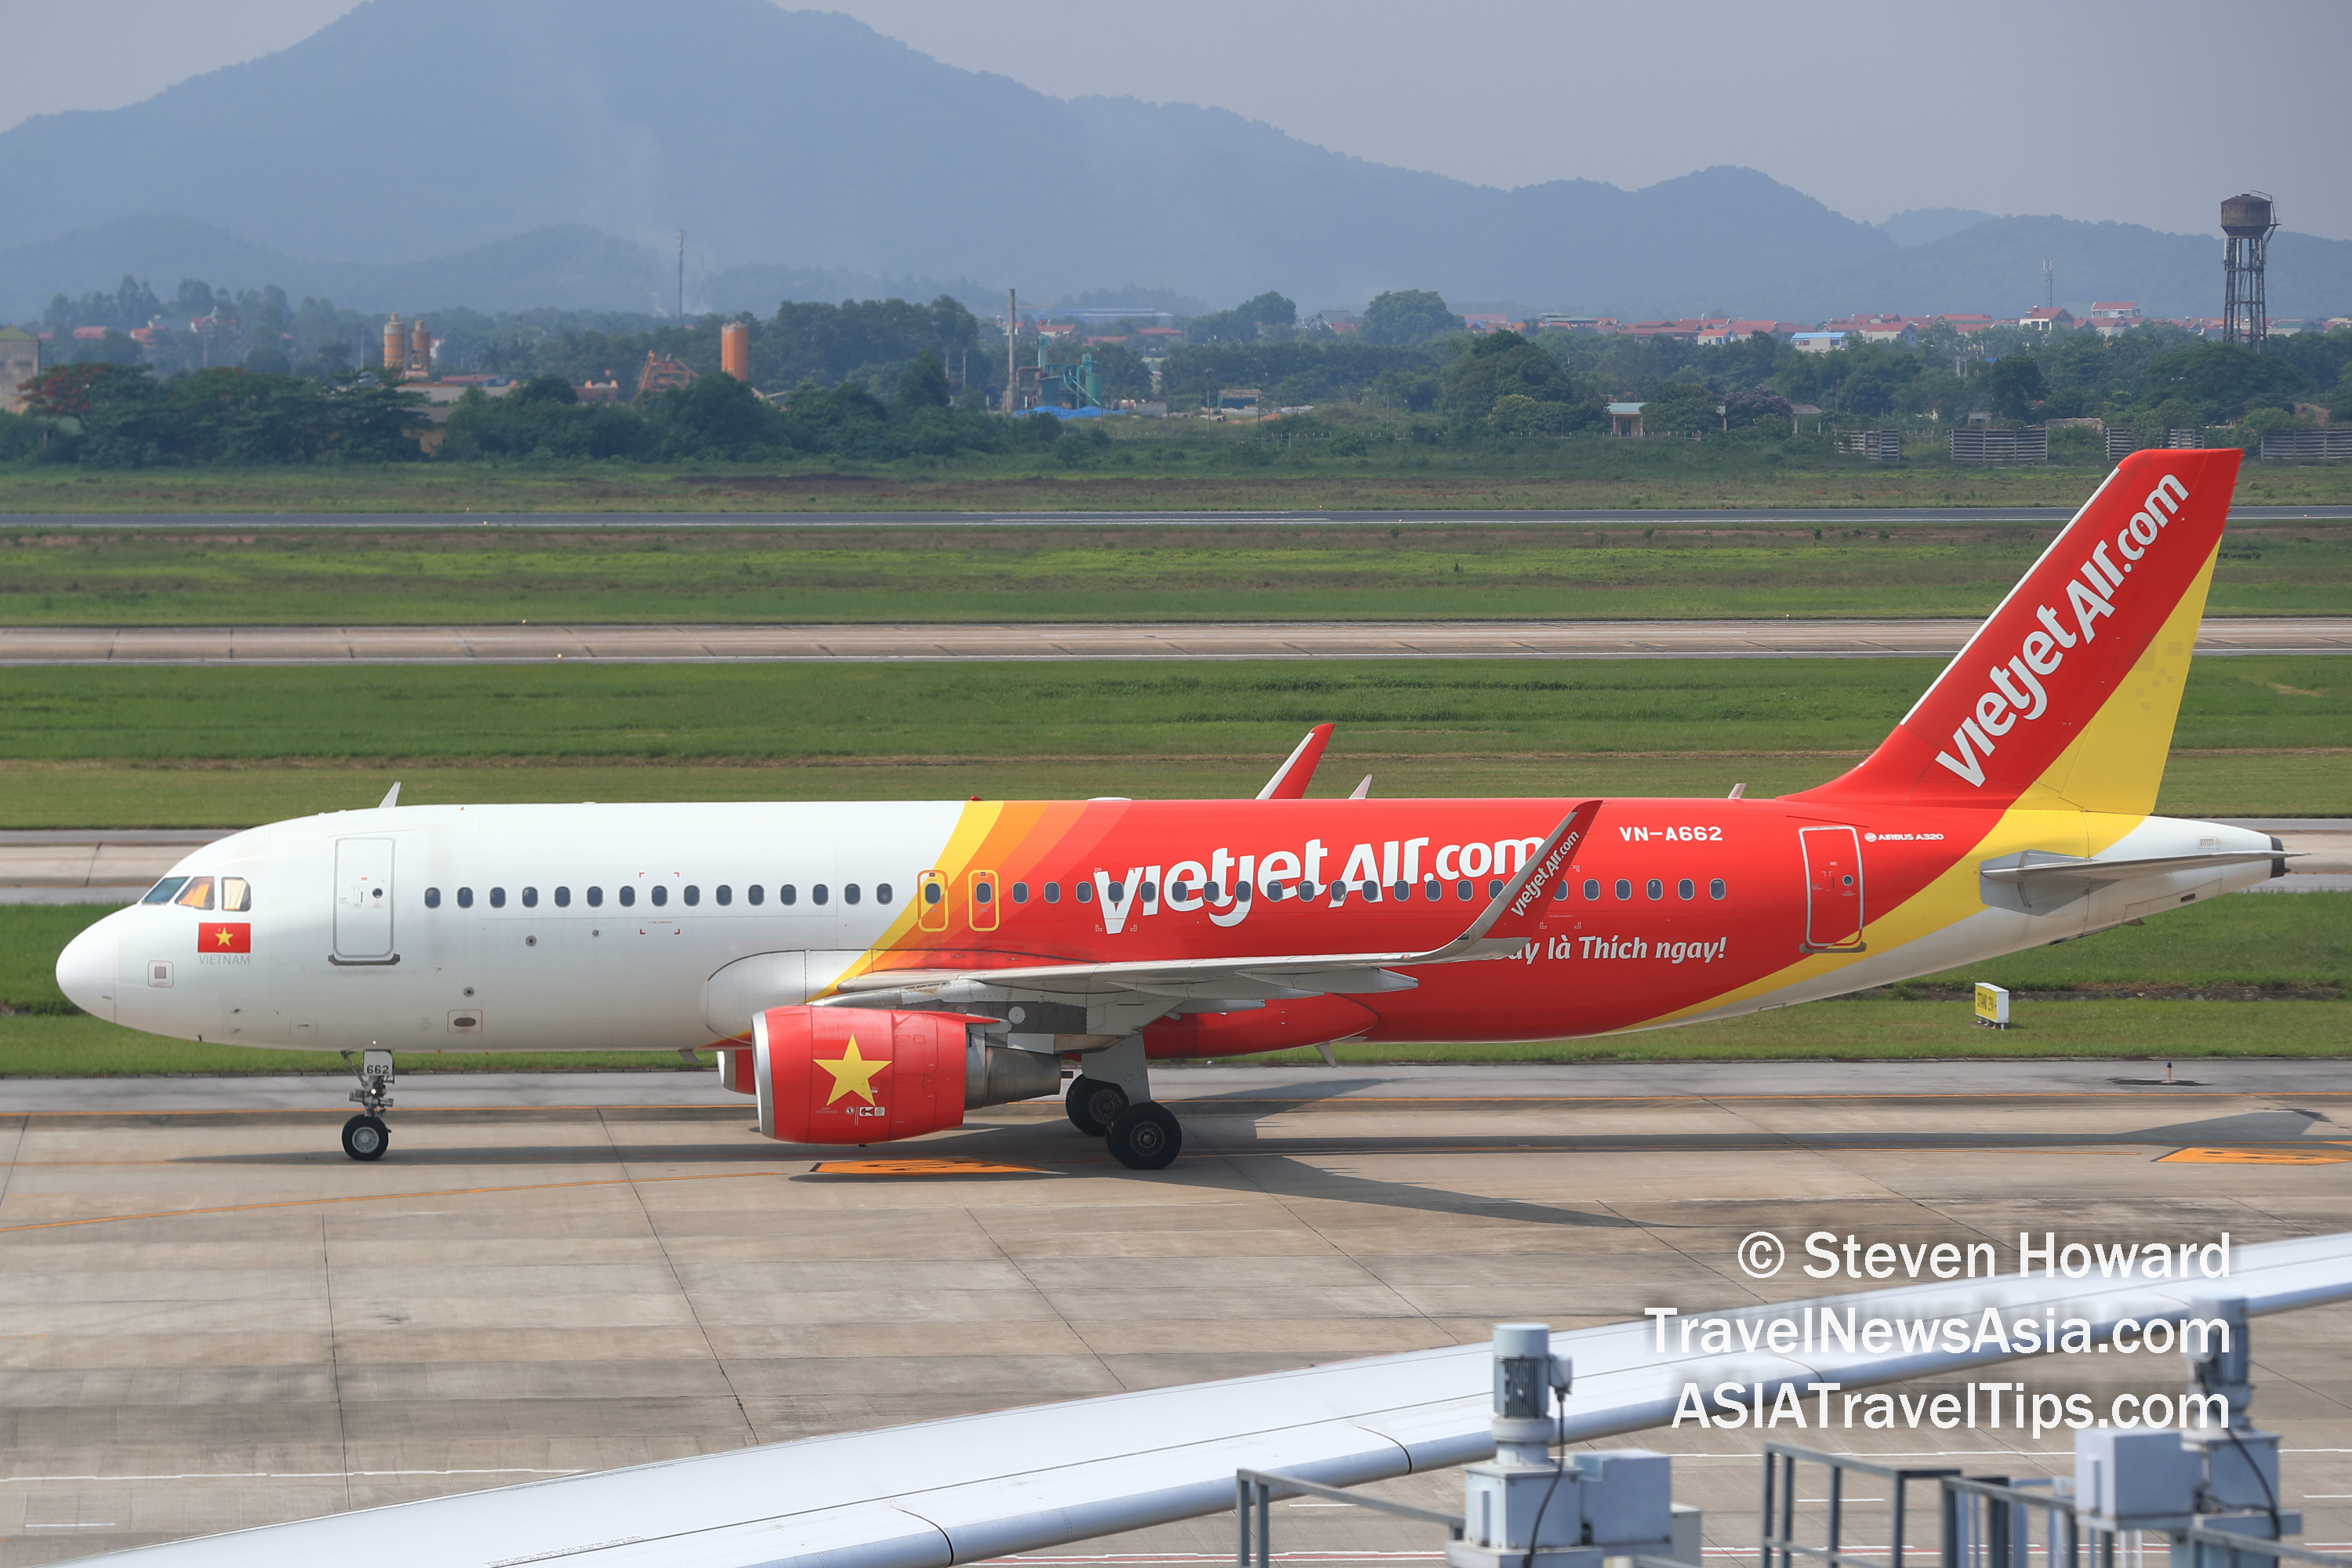 Vietjet Airbus A320 reg: VNA662. Picture by Steven Howard of TravelNewsAsia.com Click to enlarge.